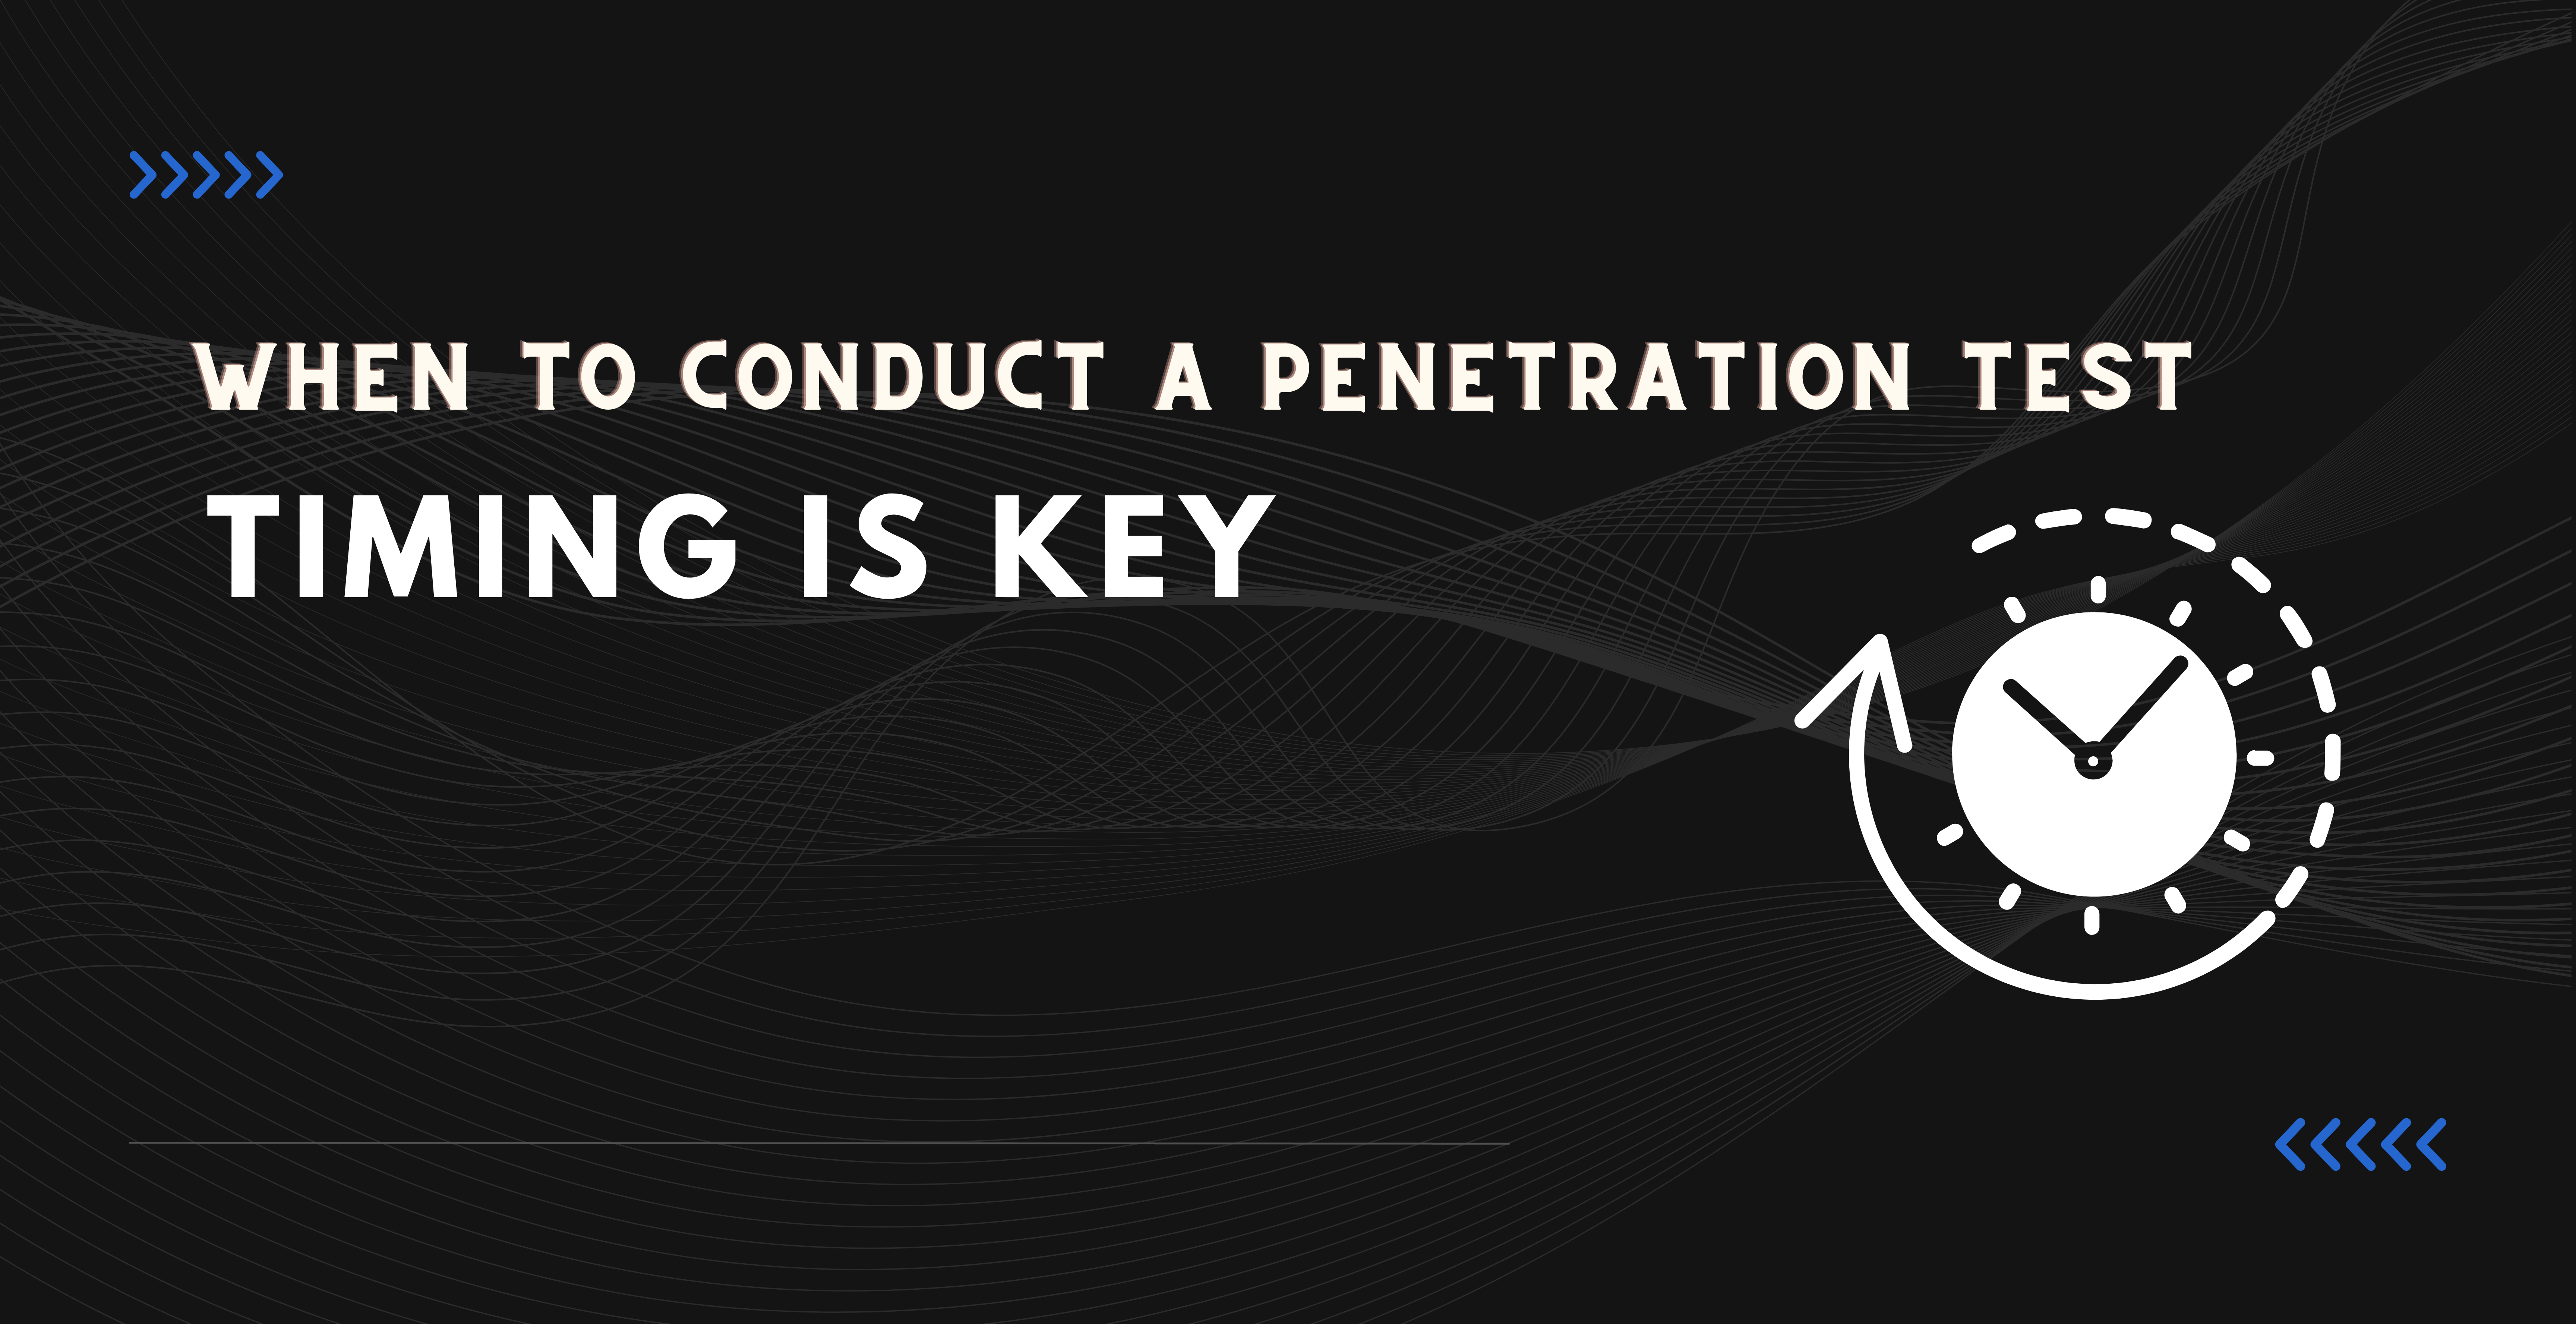 When to Conduct a Penetration Test: Timing is Key